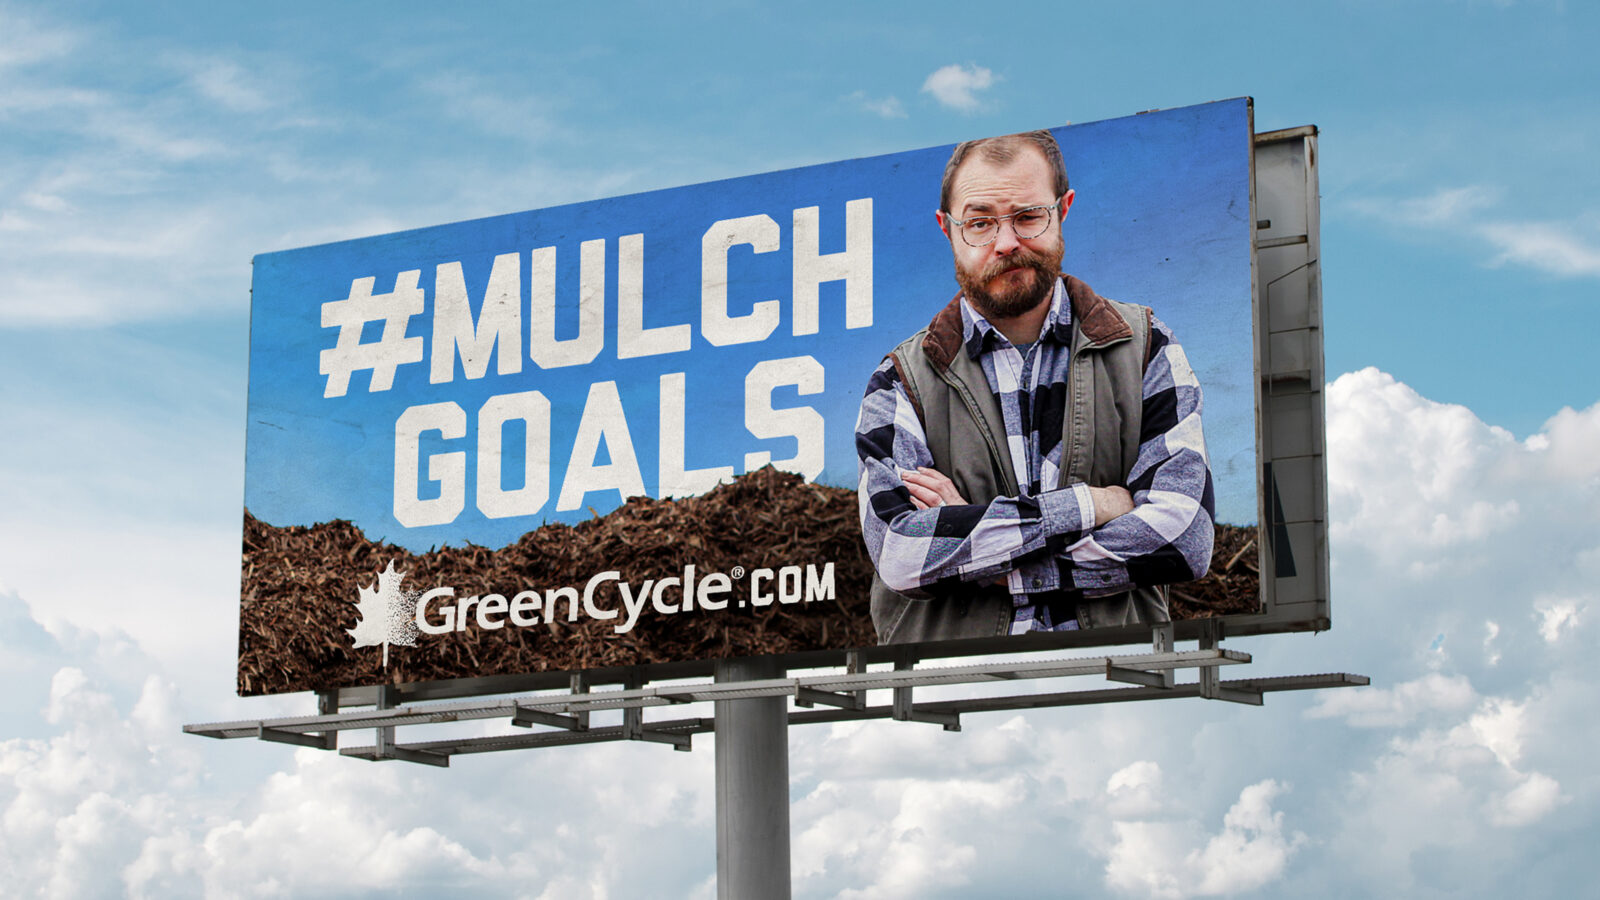 GreenCycle 2021 Outdoor Campaign